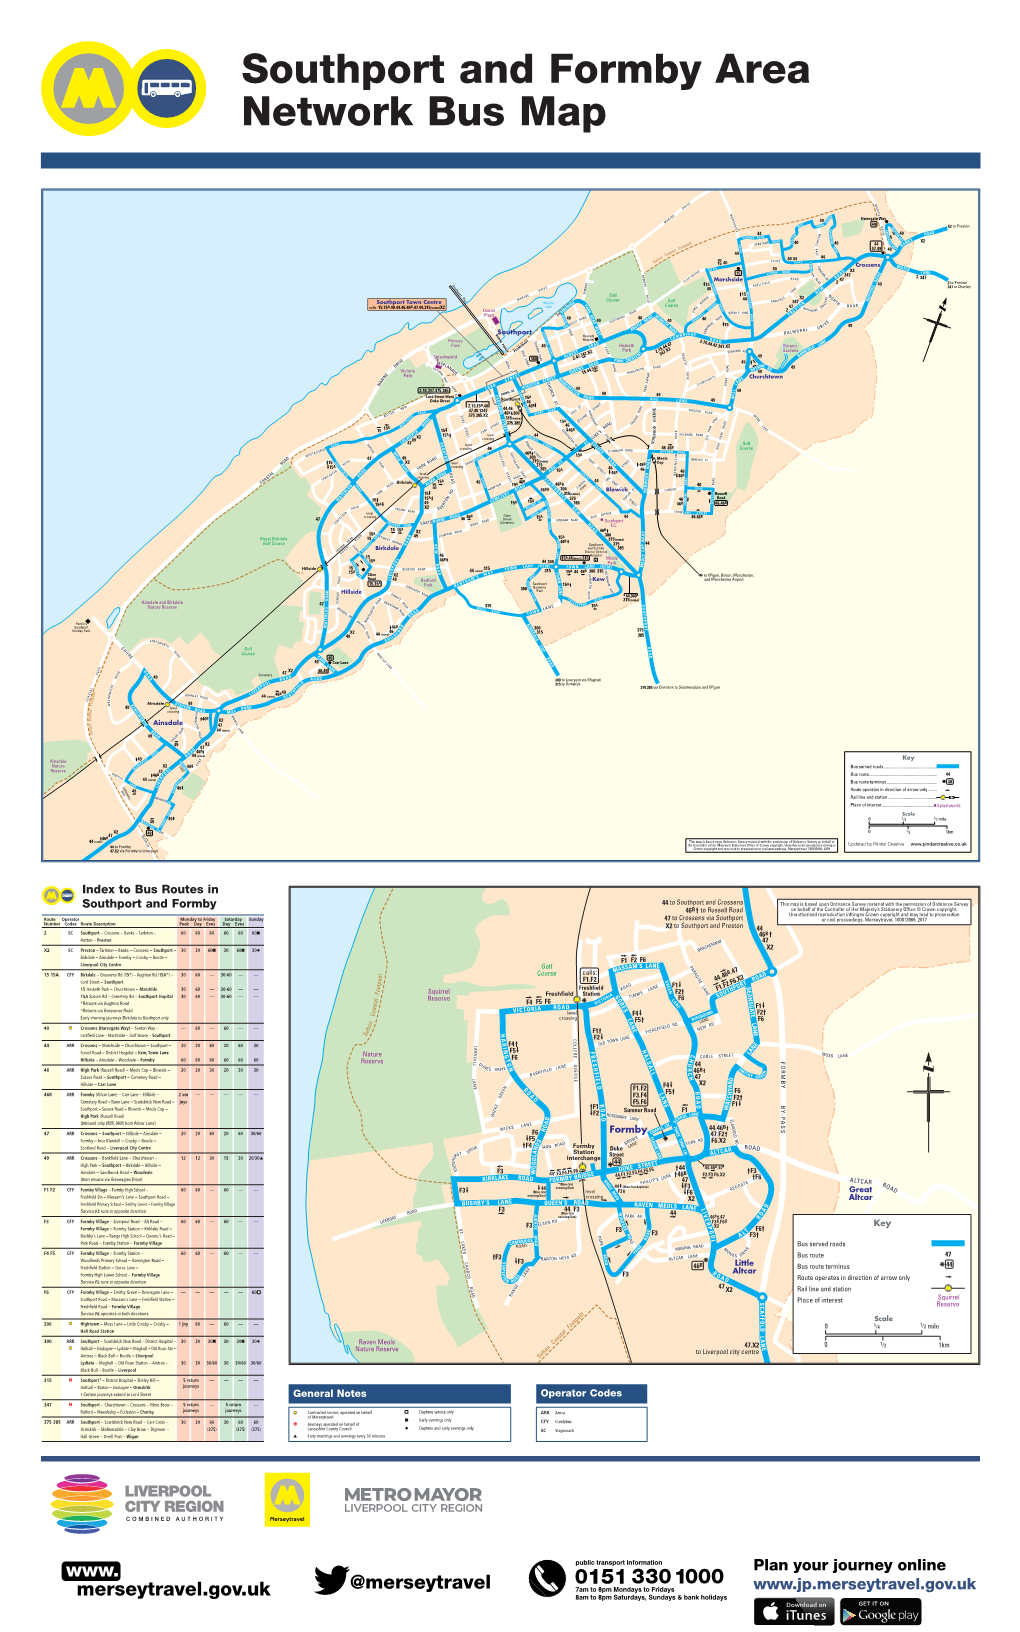 To Bus Routes in Southport and Formby